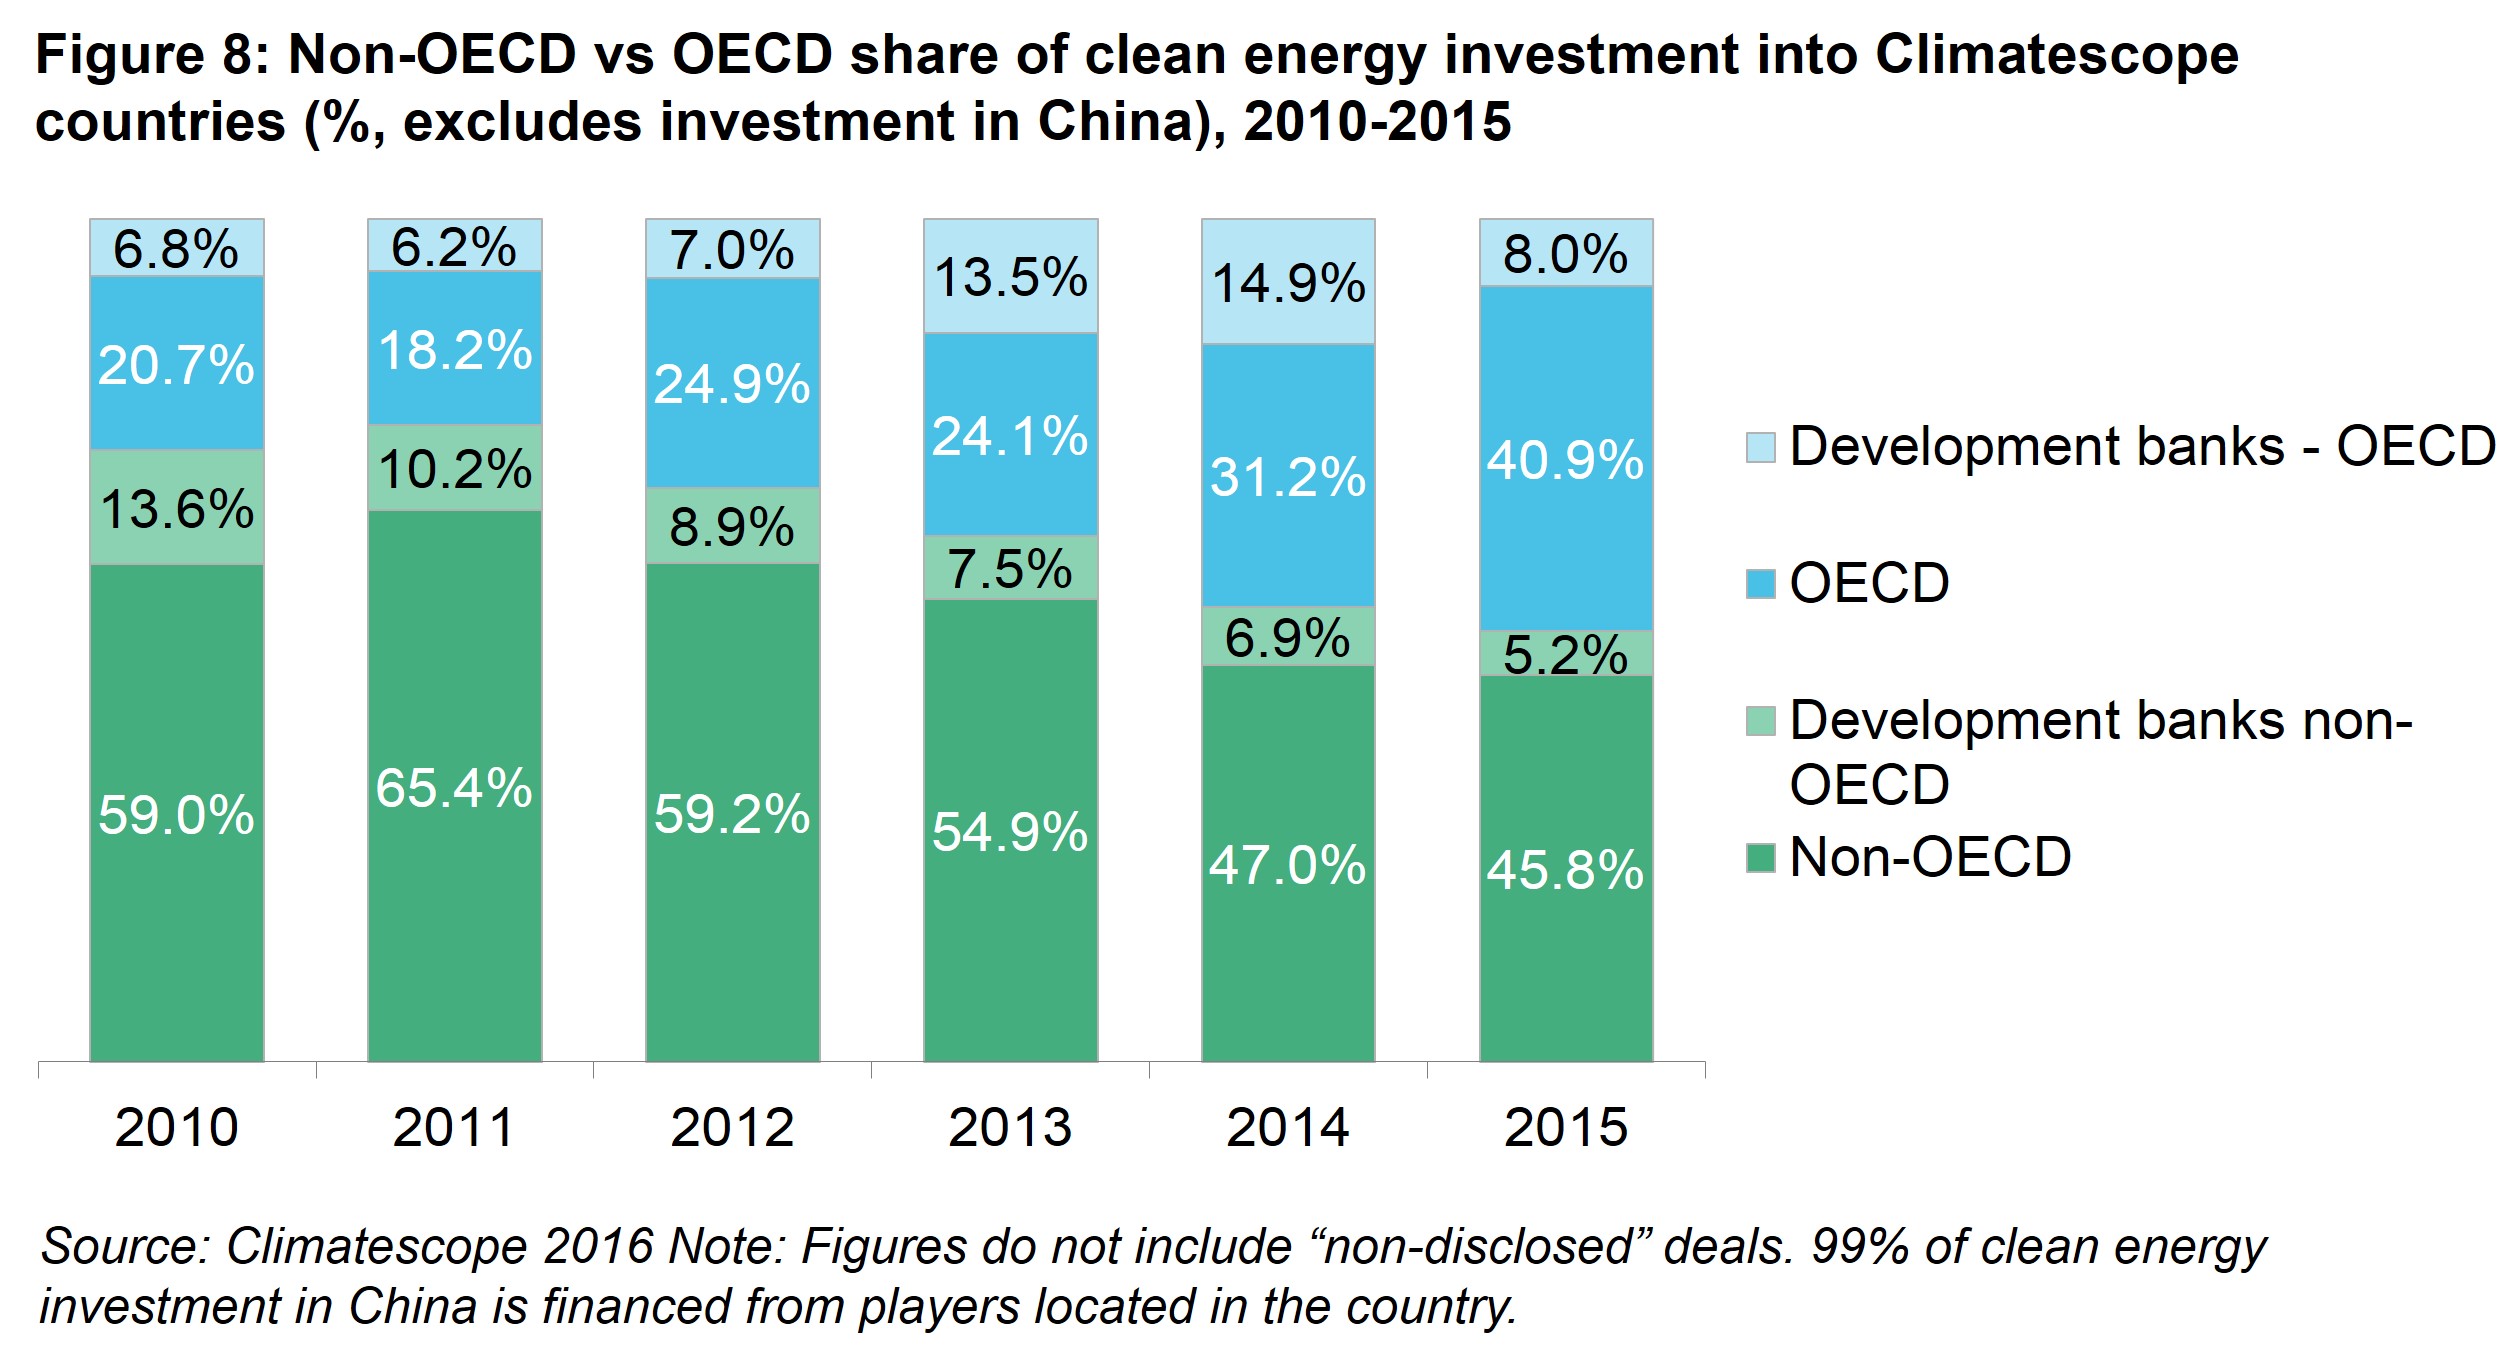 Executive Summary Fig 8 - Non-OECD vs OECD share of clean energy investment into Climatescope countries (%, excludes investment in China), 2010-2015